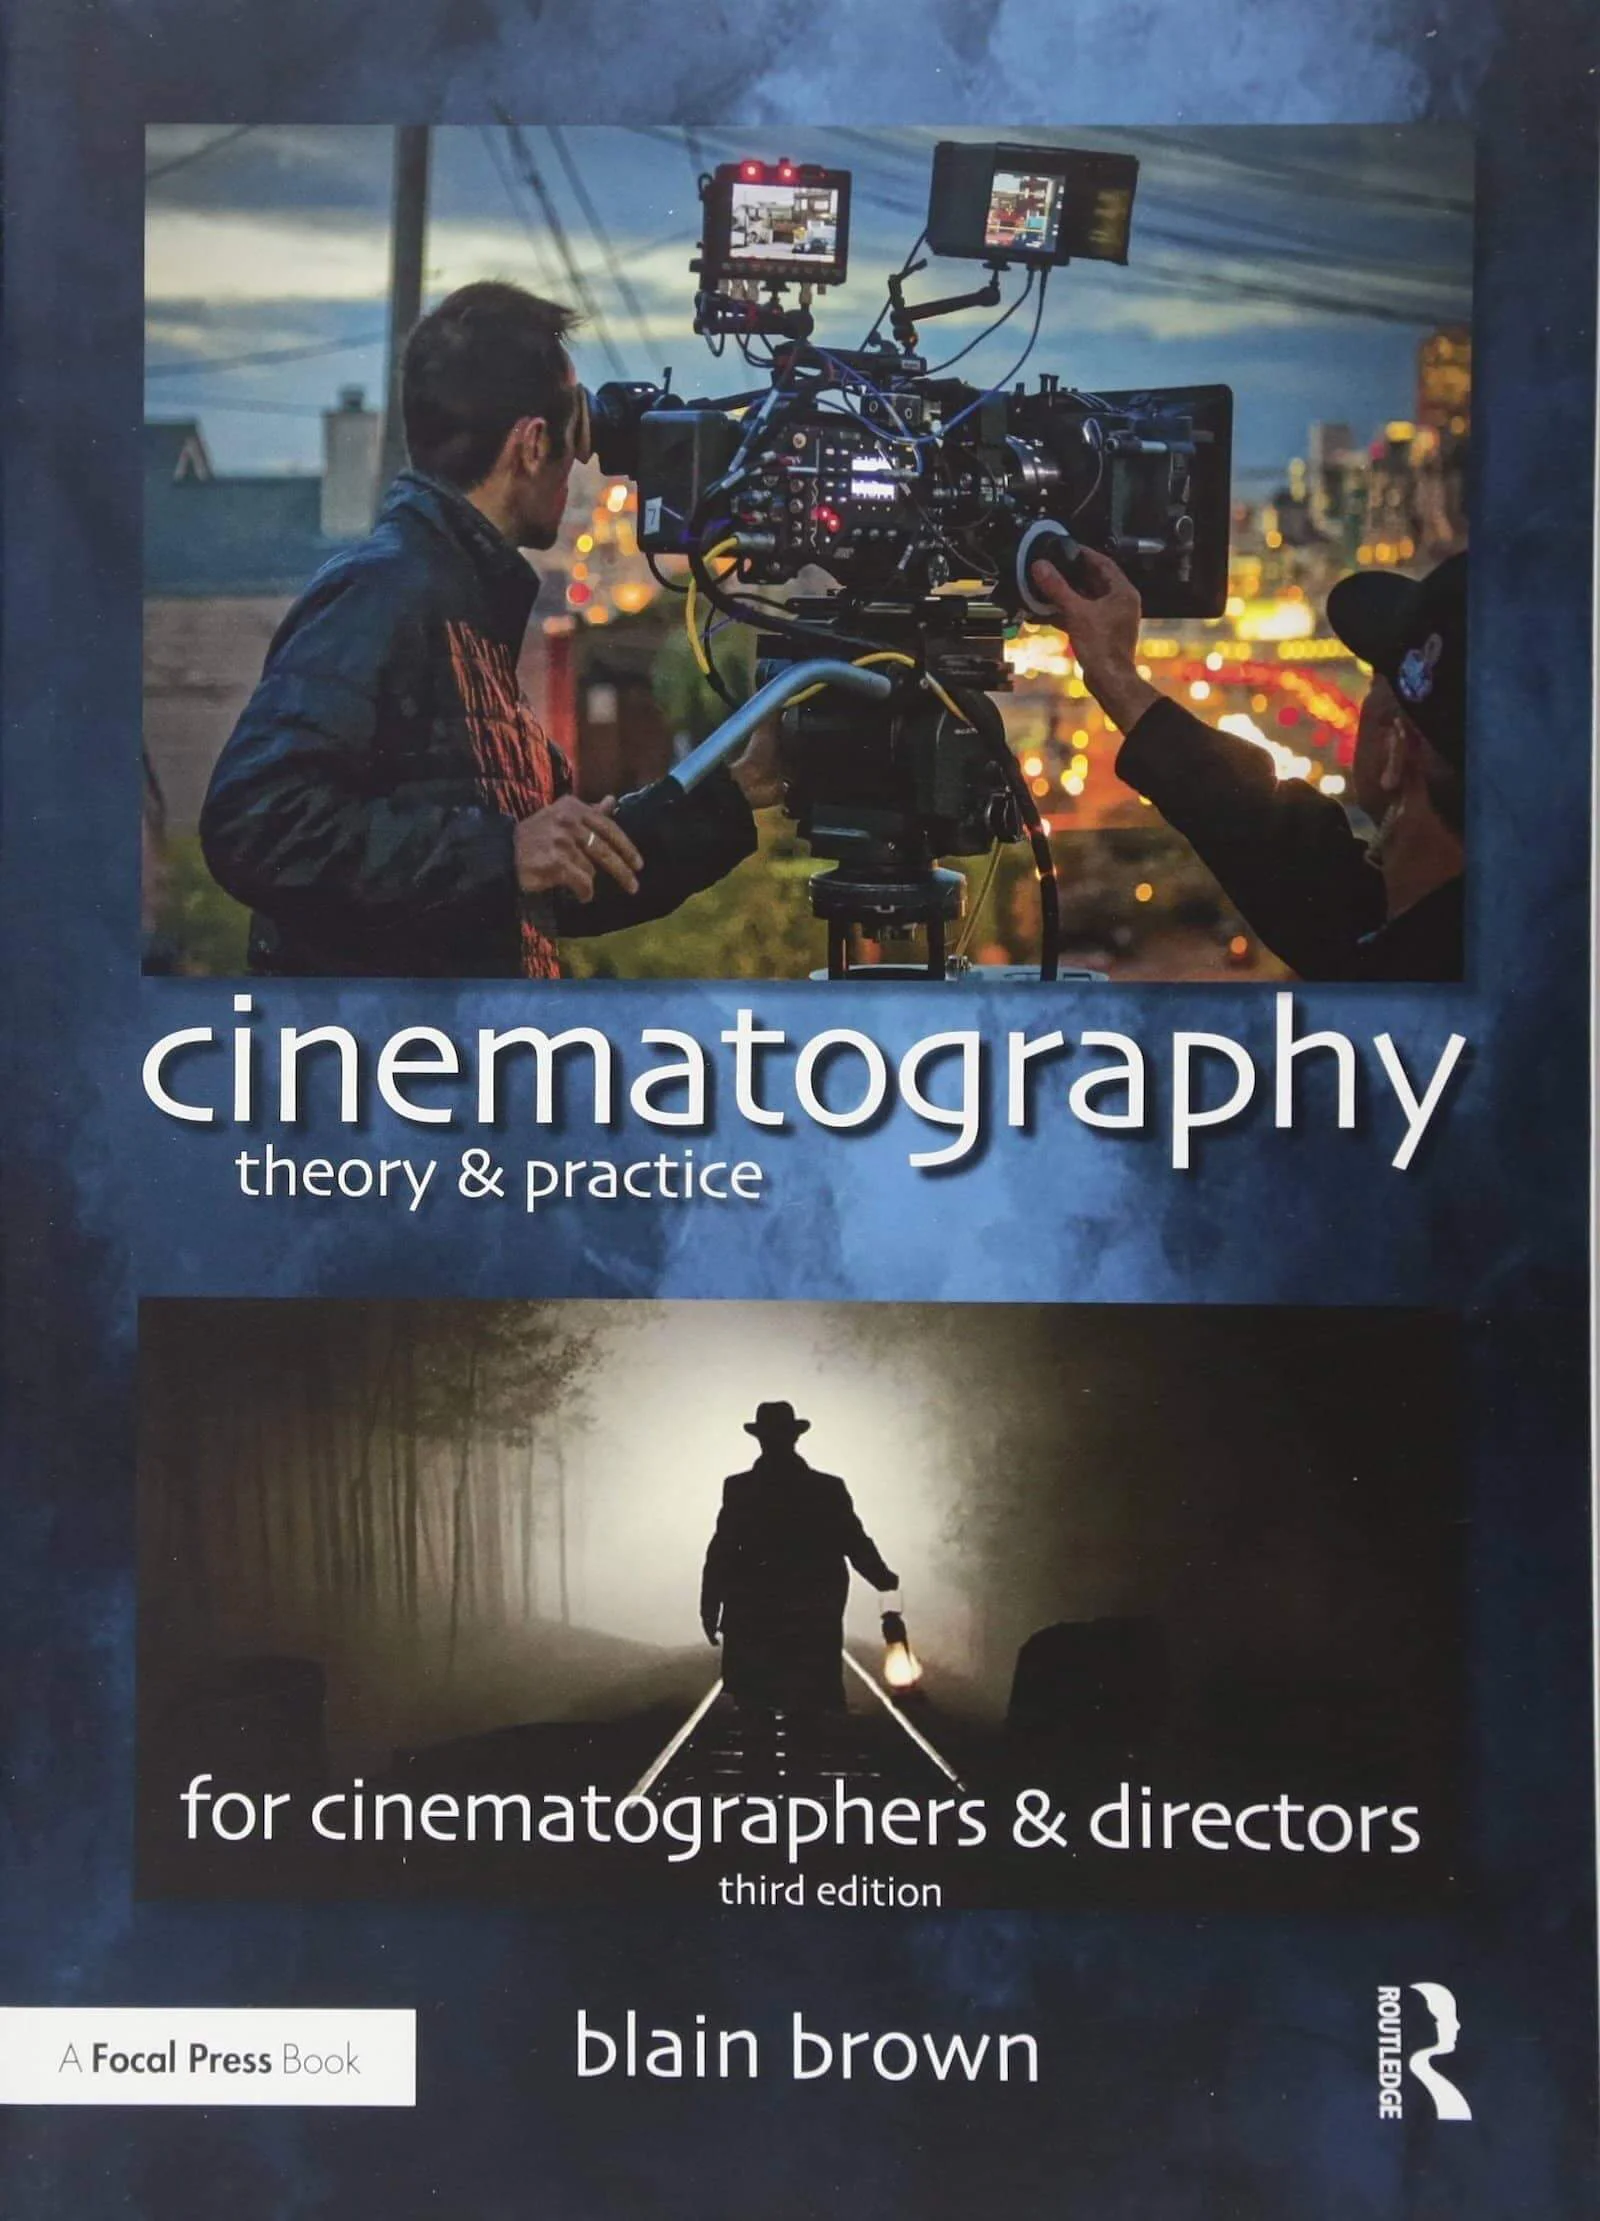 Best Cinematography Books - Cinematography Theory and Practice - Blain Brown - StudioBinder